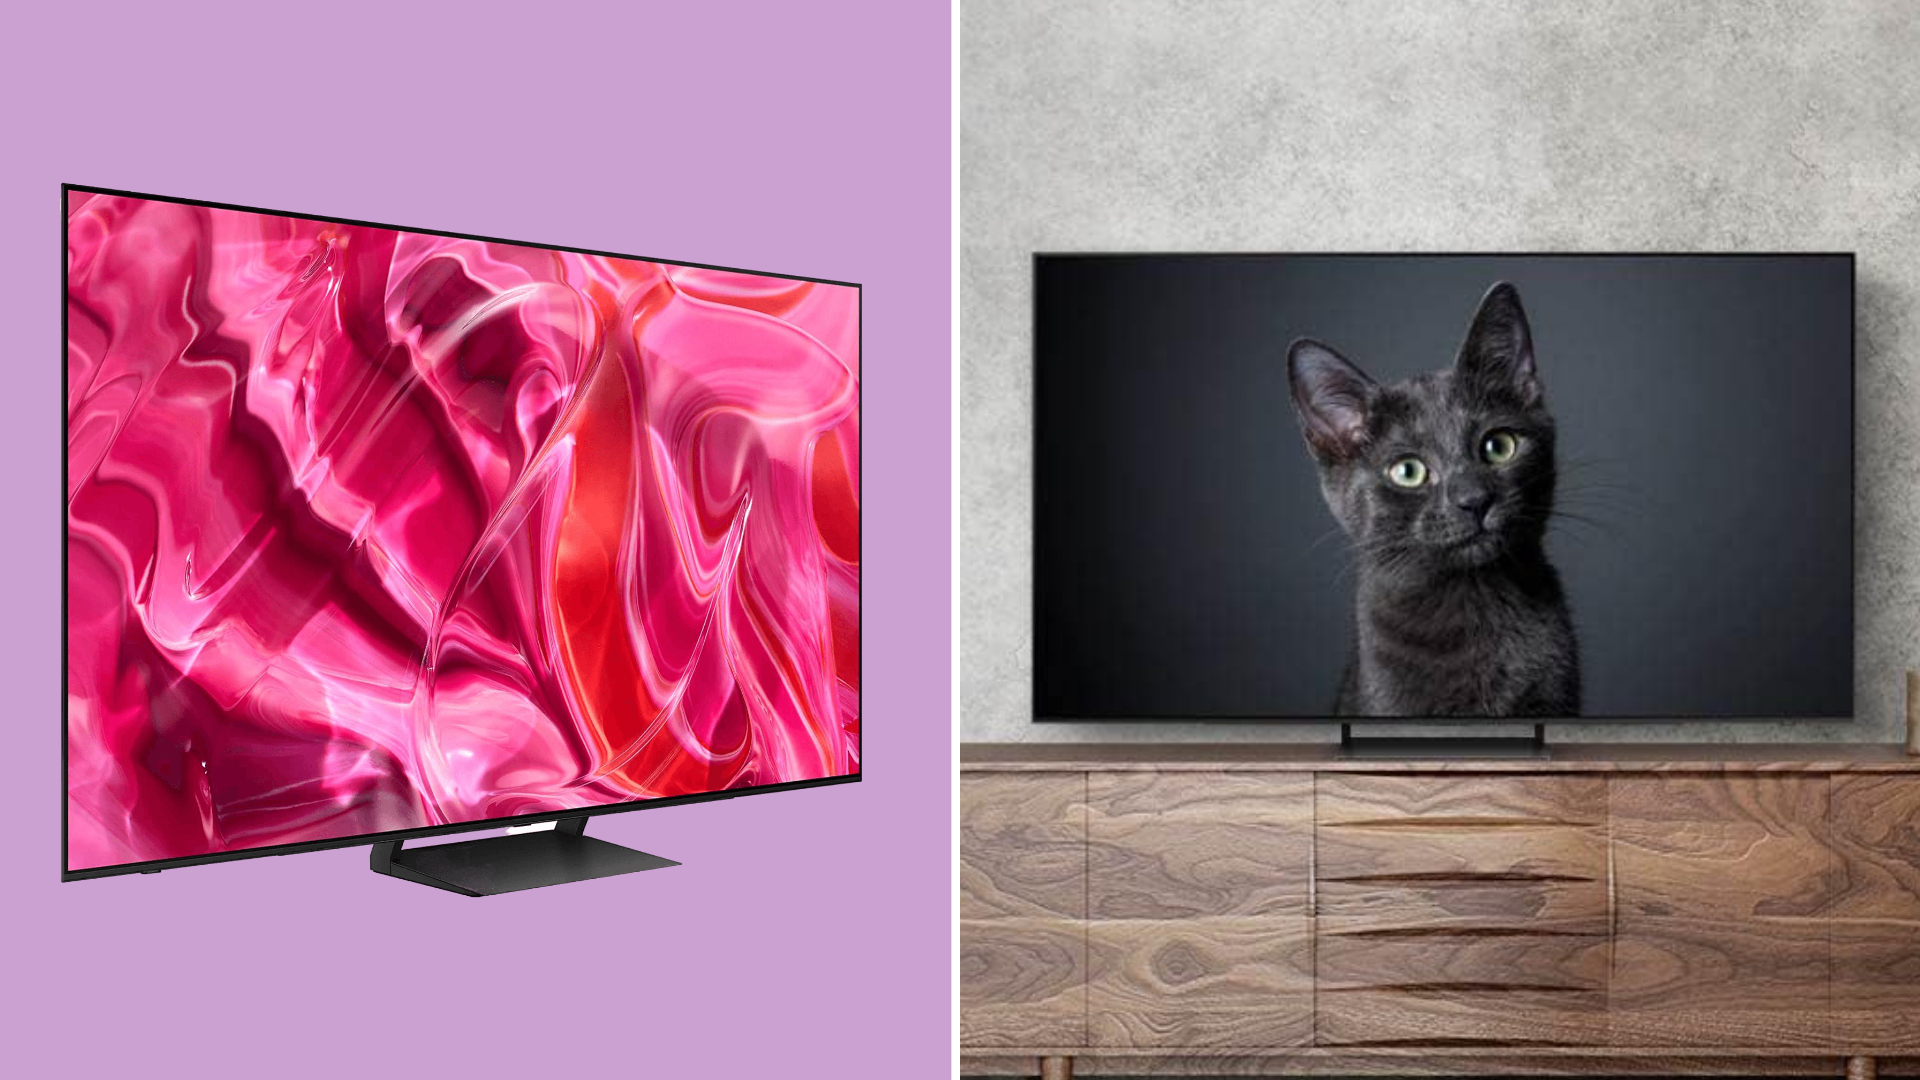 Thinking of buying a 4K TV?